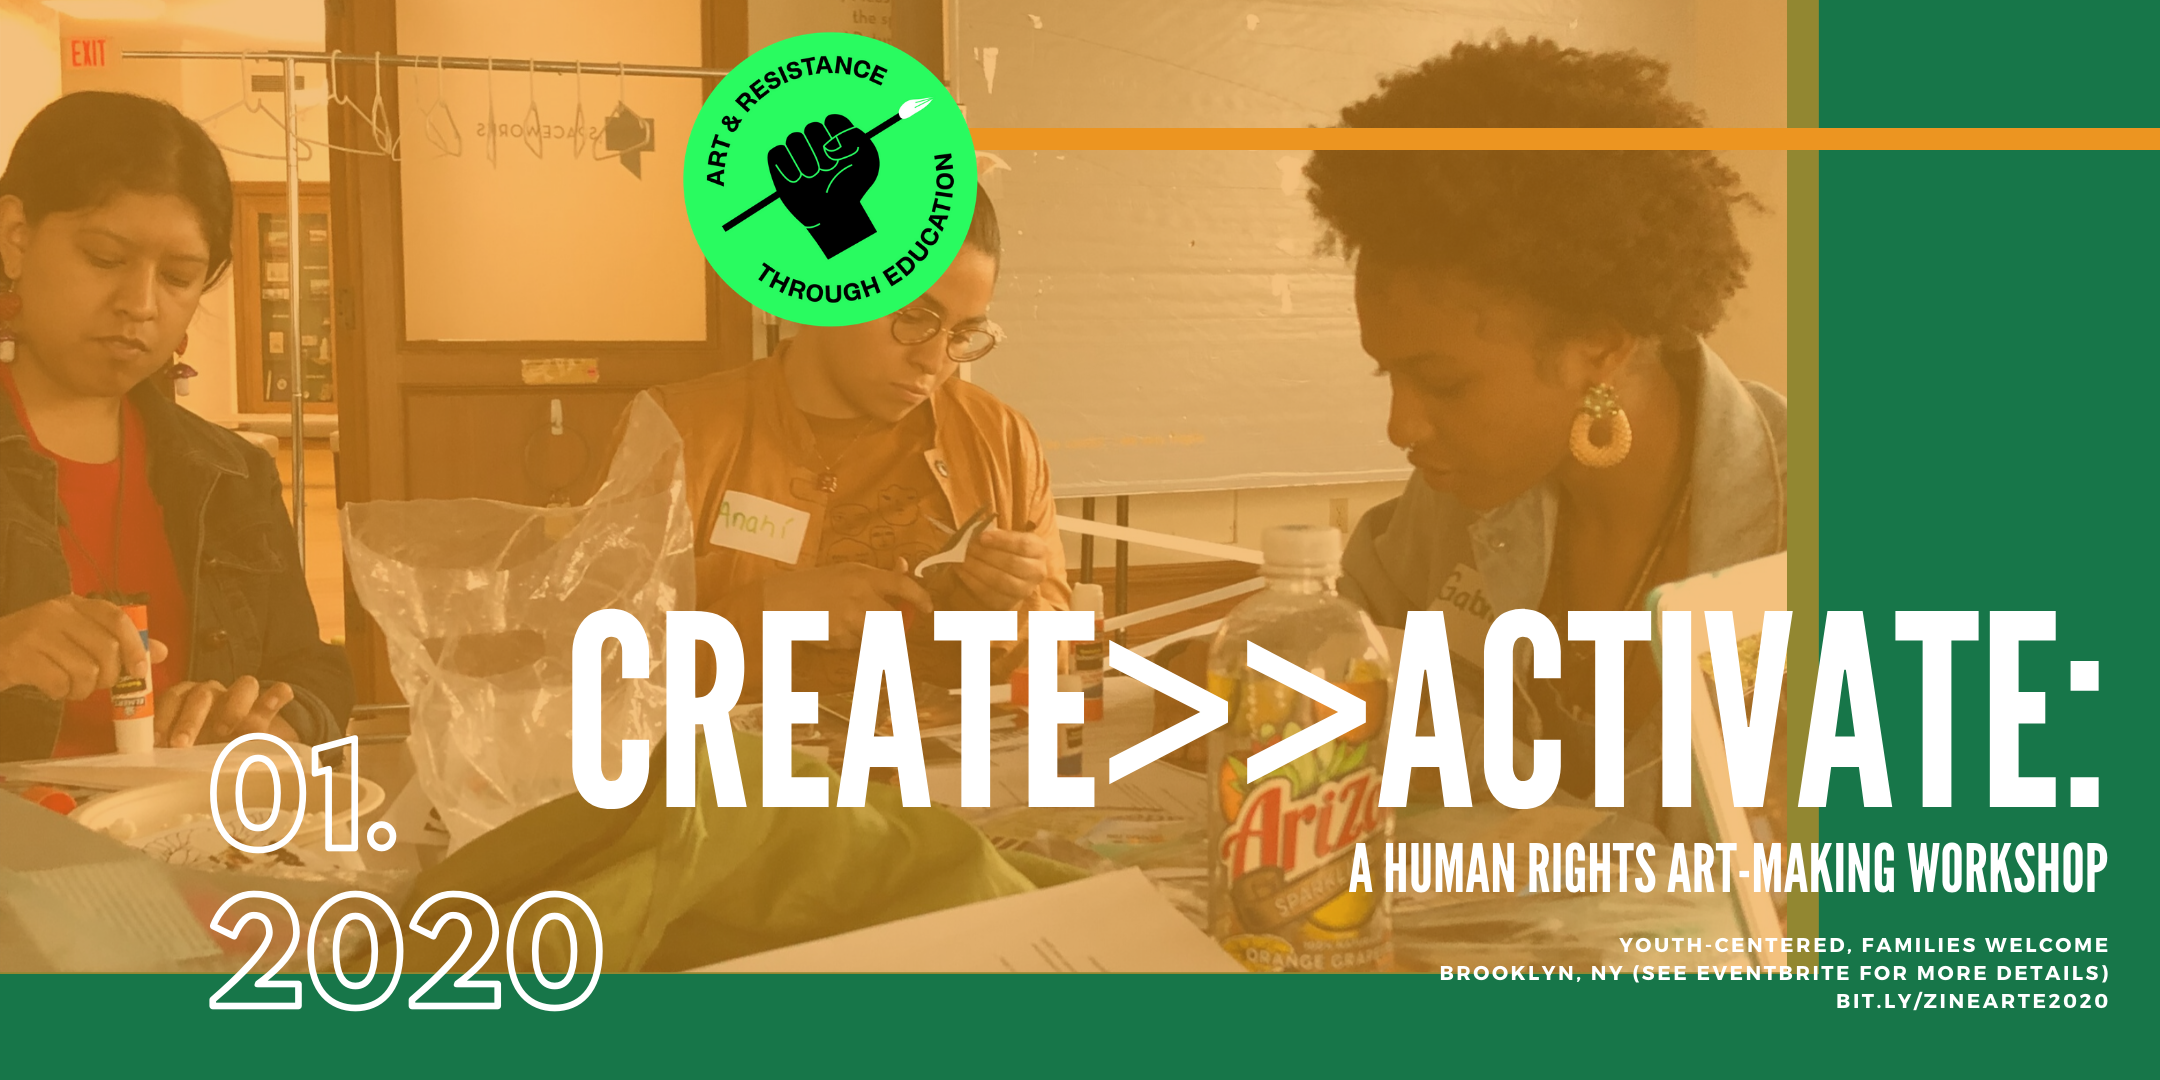 Create>>Activate: A Human Rights Art-Making Workshop